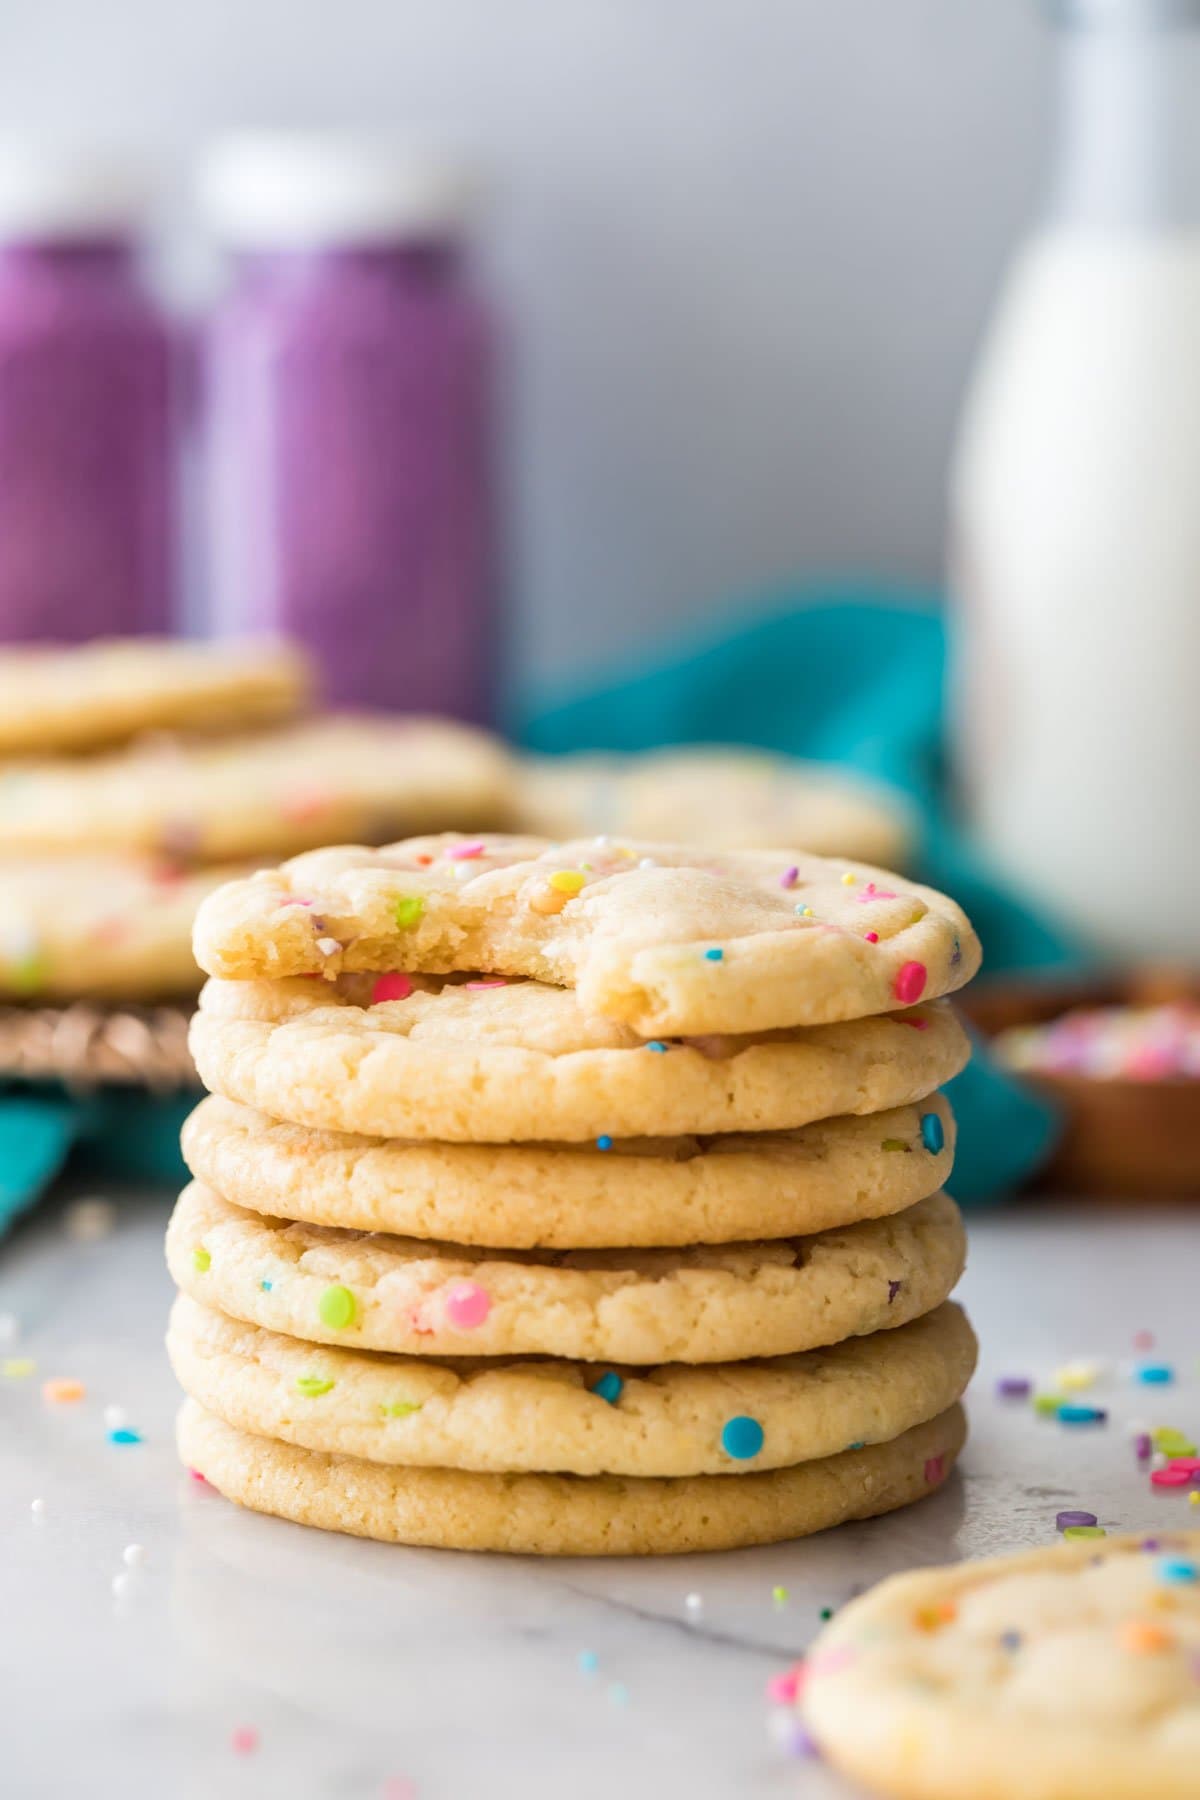 tall stack of round, sprinkle flecked cookies with the top cookie missing a bite